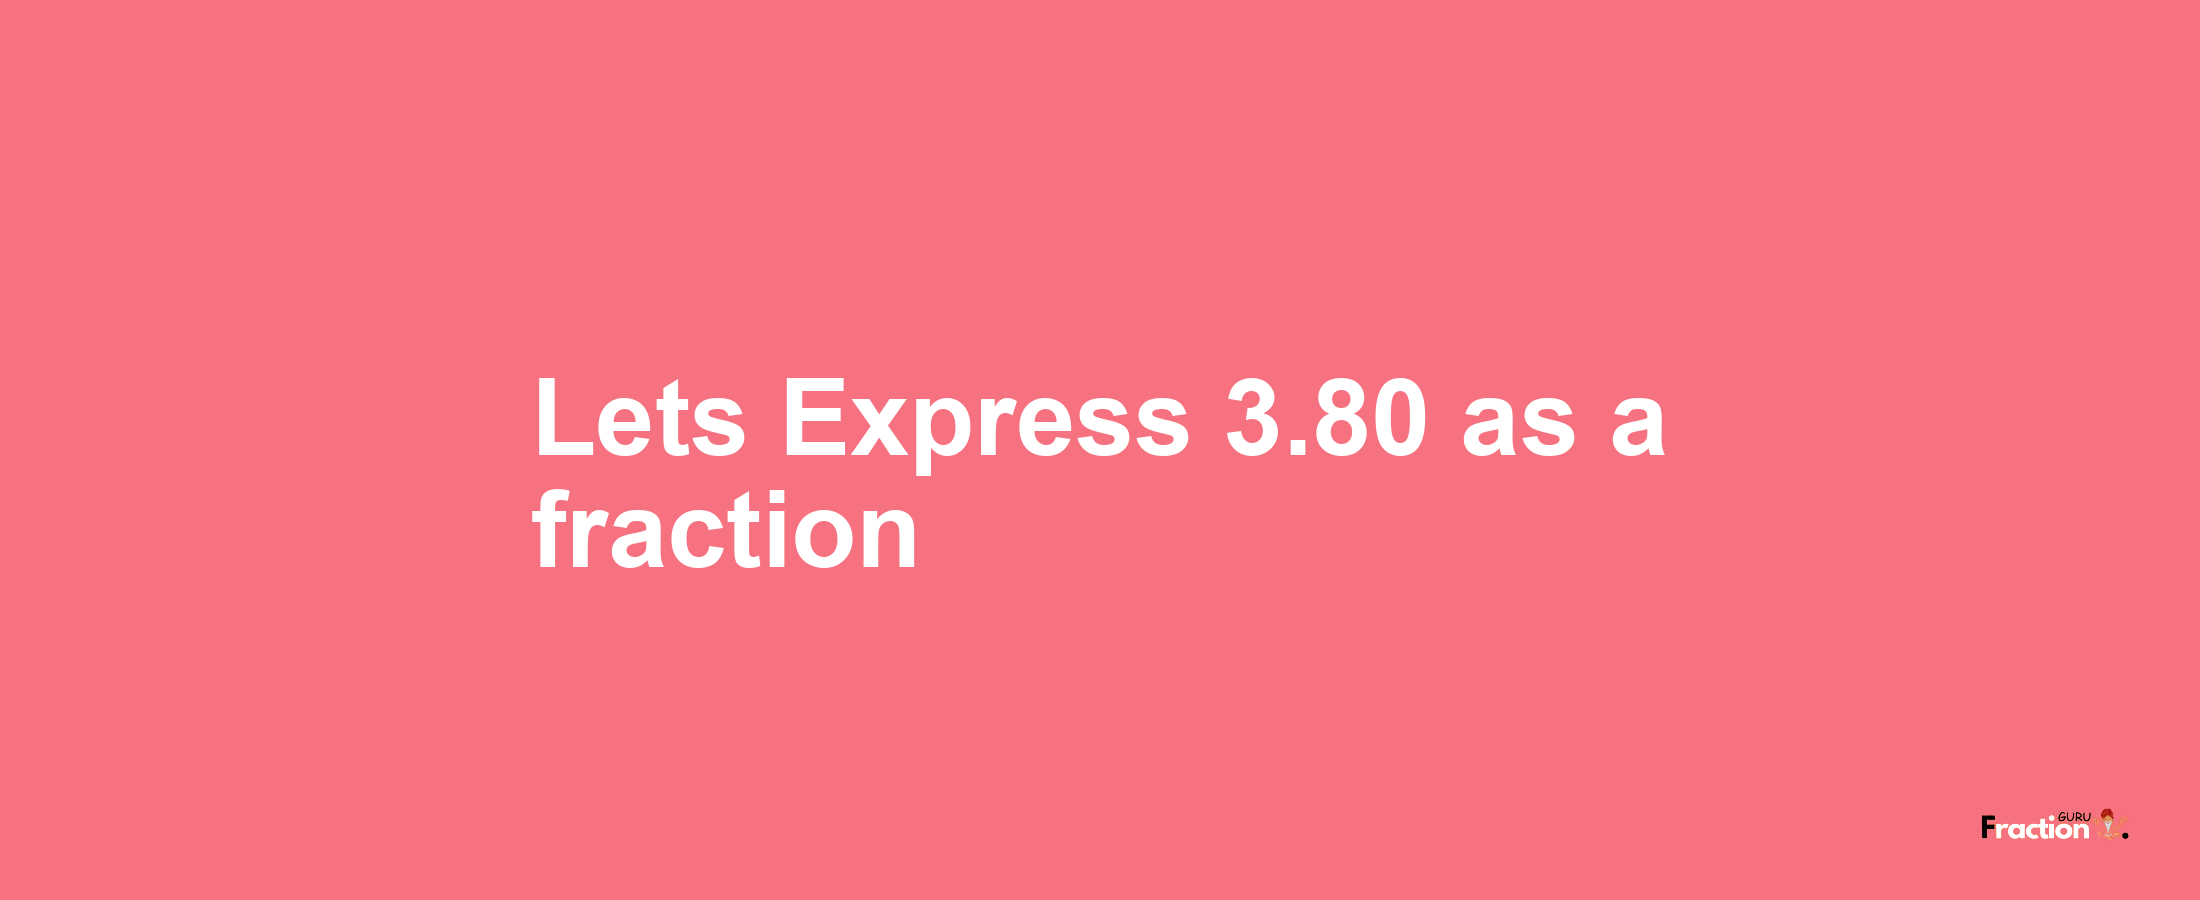 Lets Express 3.80 as afraction